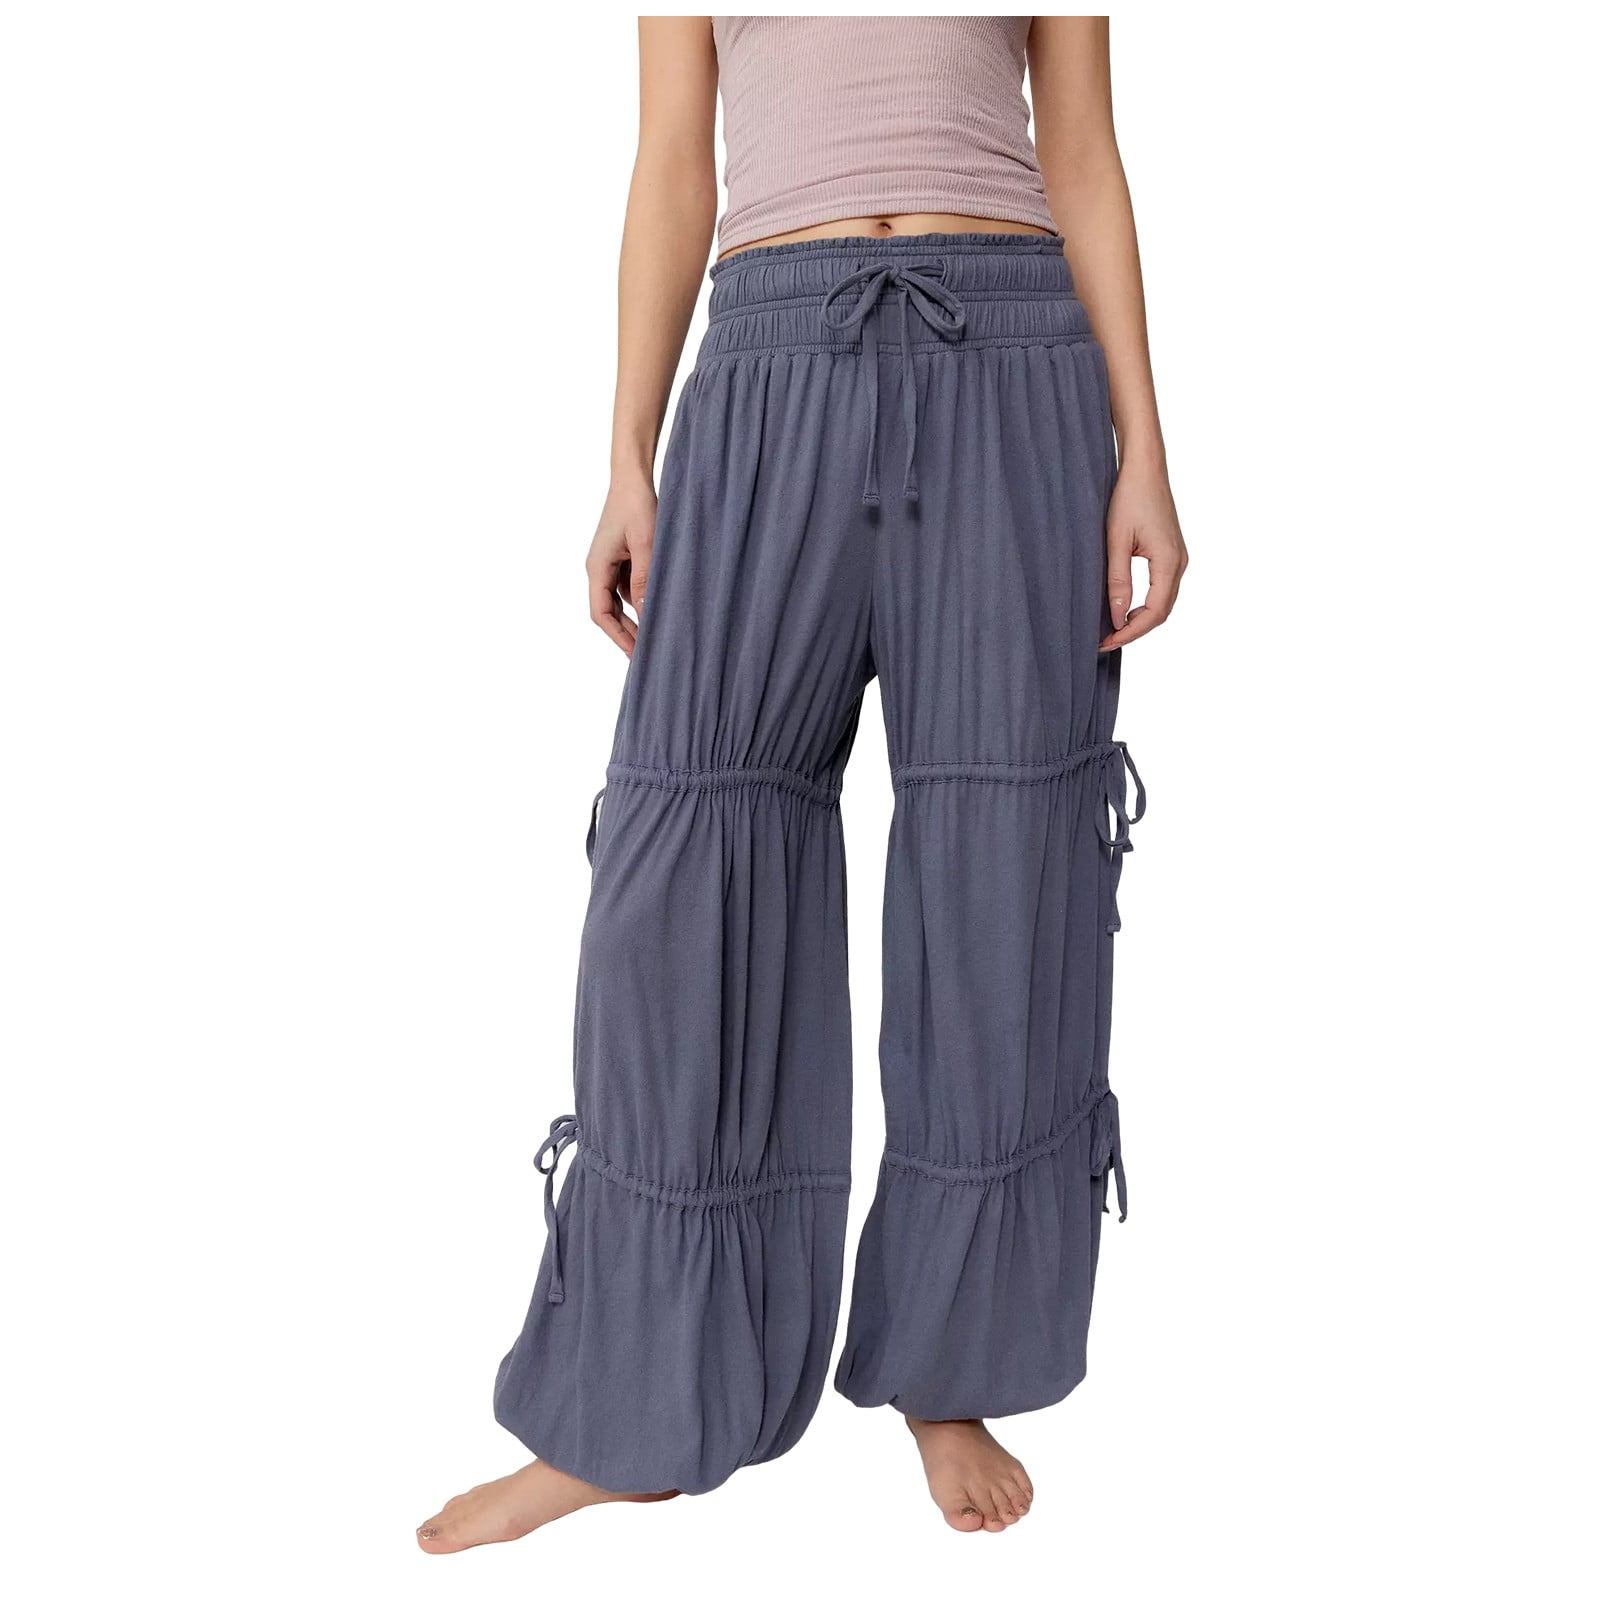 Deagia Women's High-Waisted Sweatpants Full Length Pants Casual Layered  Drawstring Pleated Pants Legging Baggy Loose Trousers Comfortable XL #325 